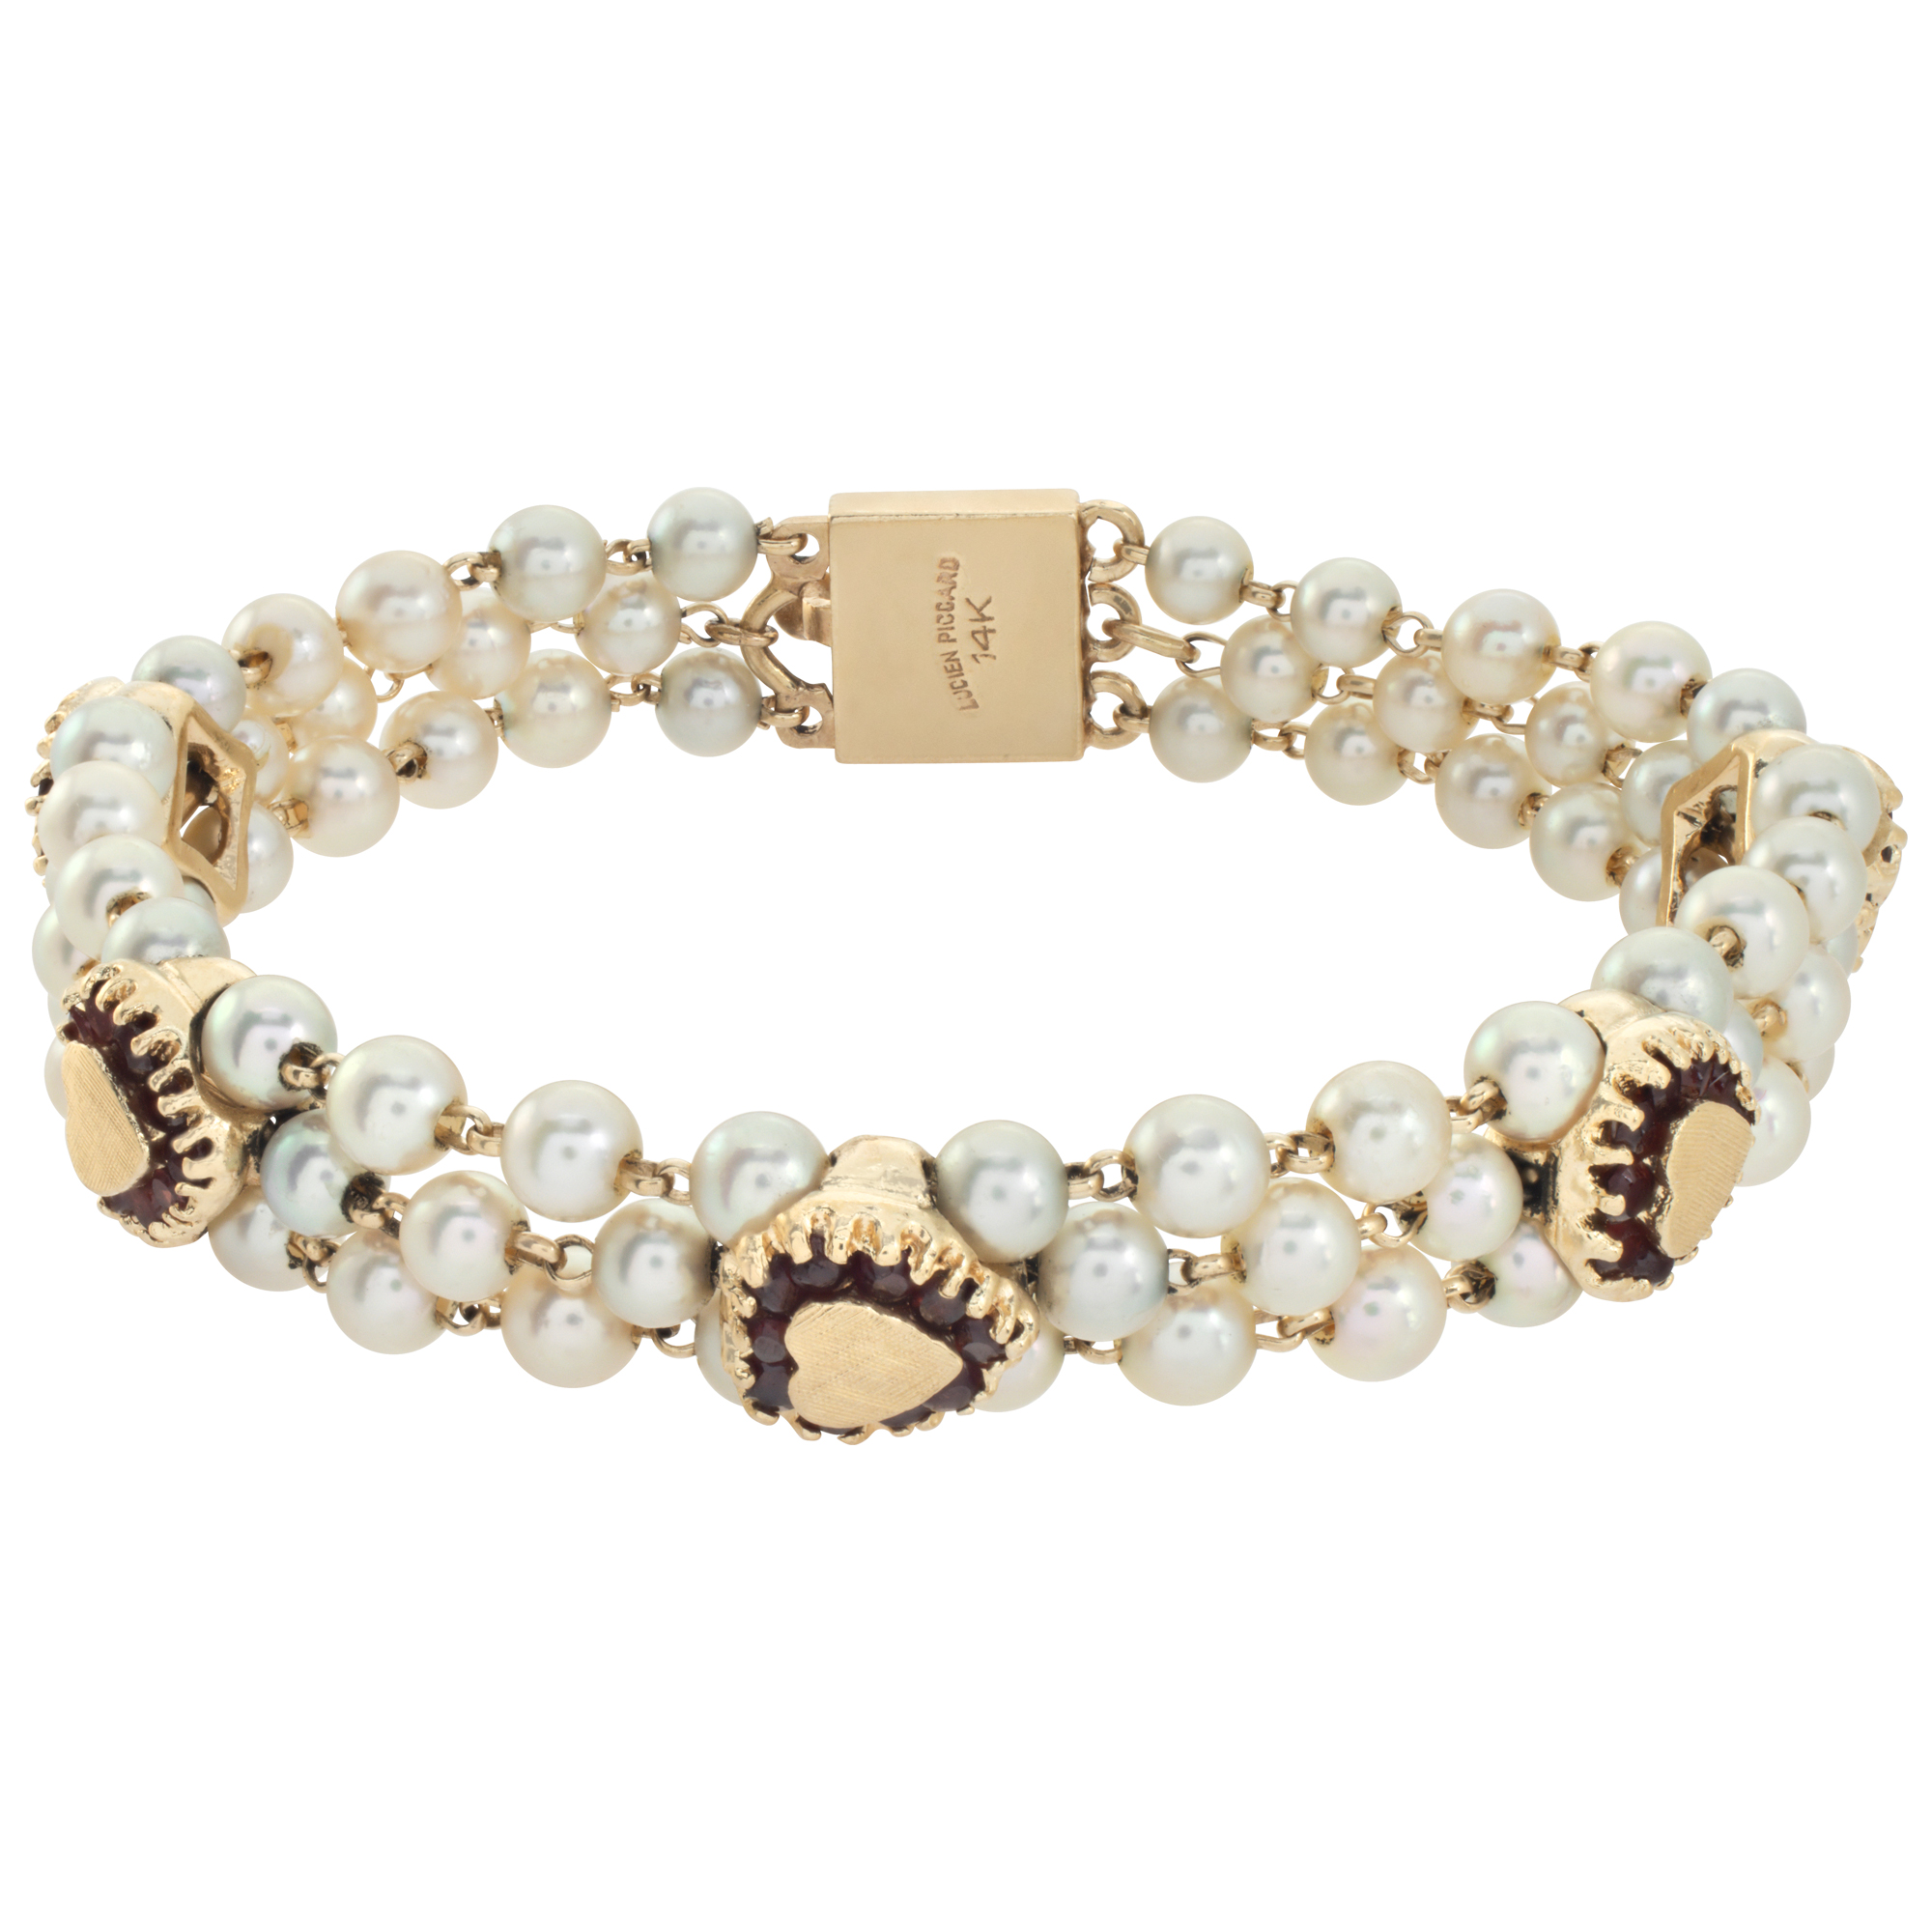 Lucien Piccard pearl bracelet with heart rubies in 14k yellow gold